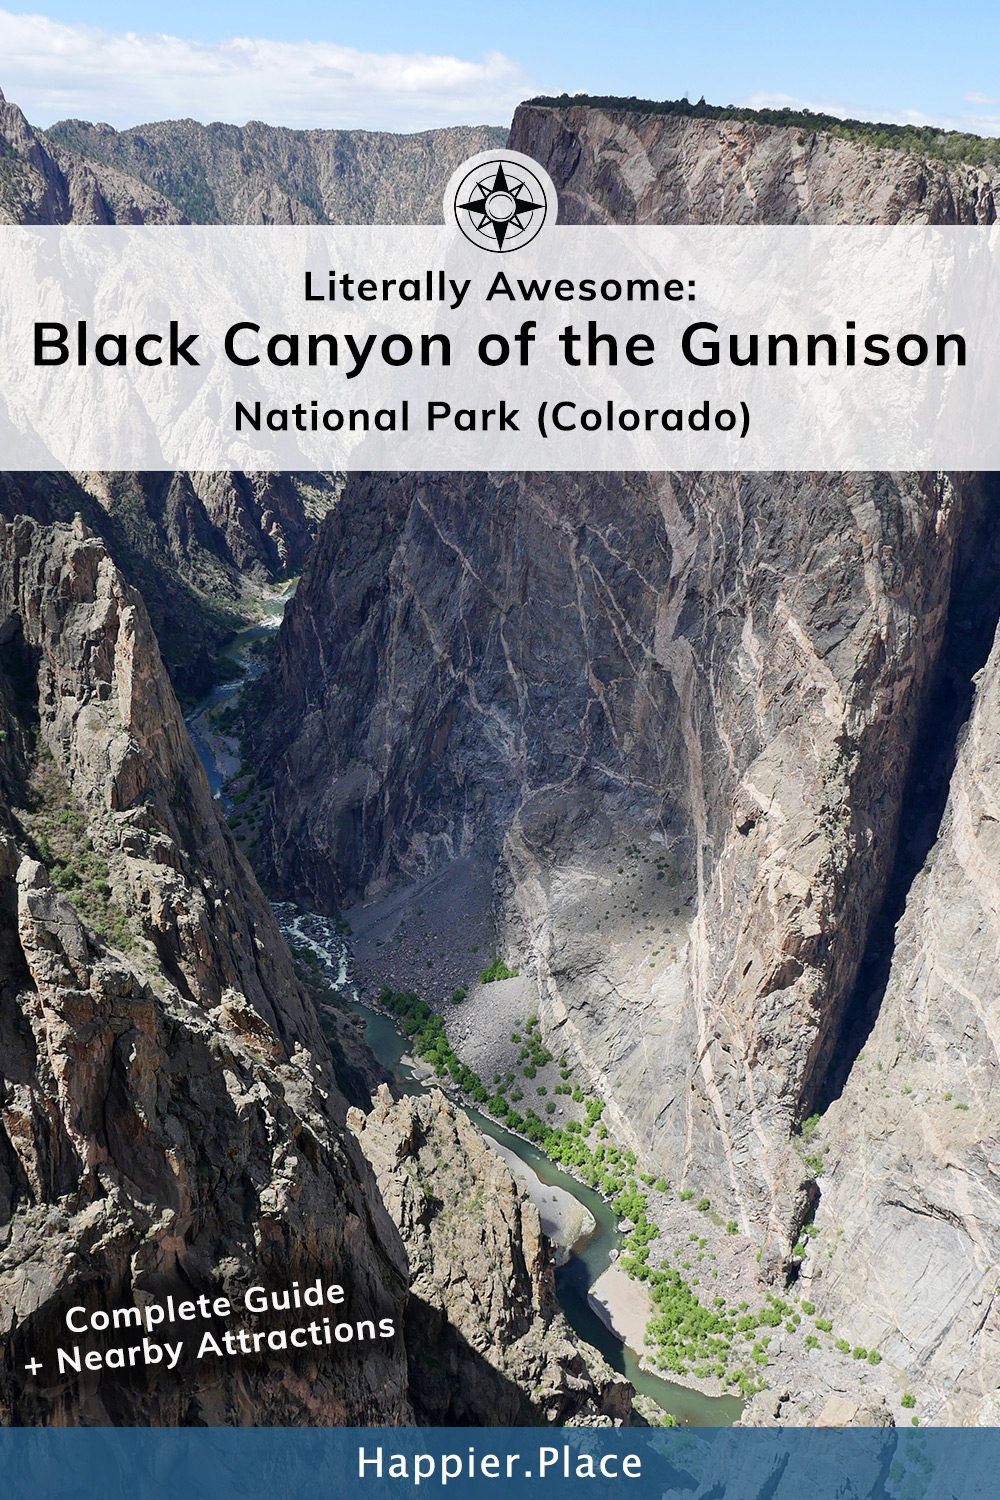 Black Canyon of the Gunnison National Park in Colorado Painted Wall complete guide HappierPlace